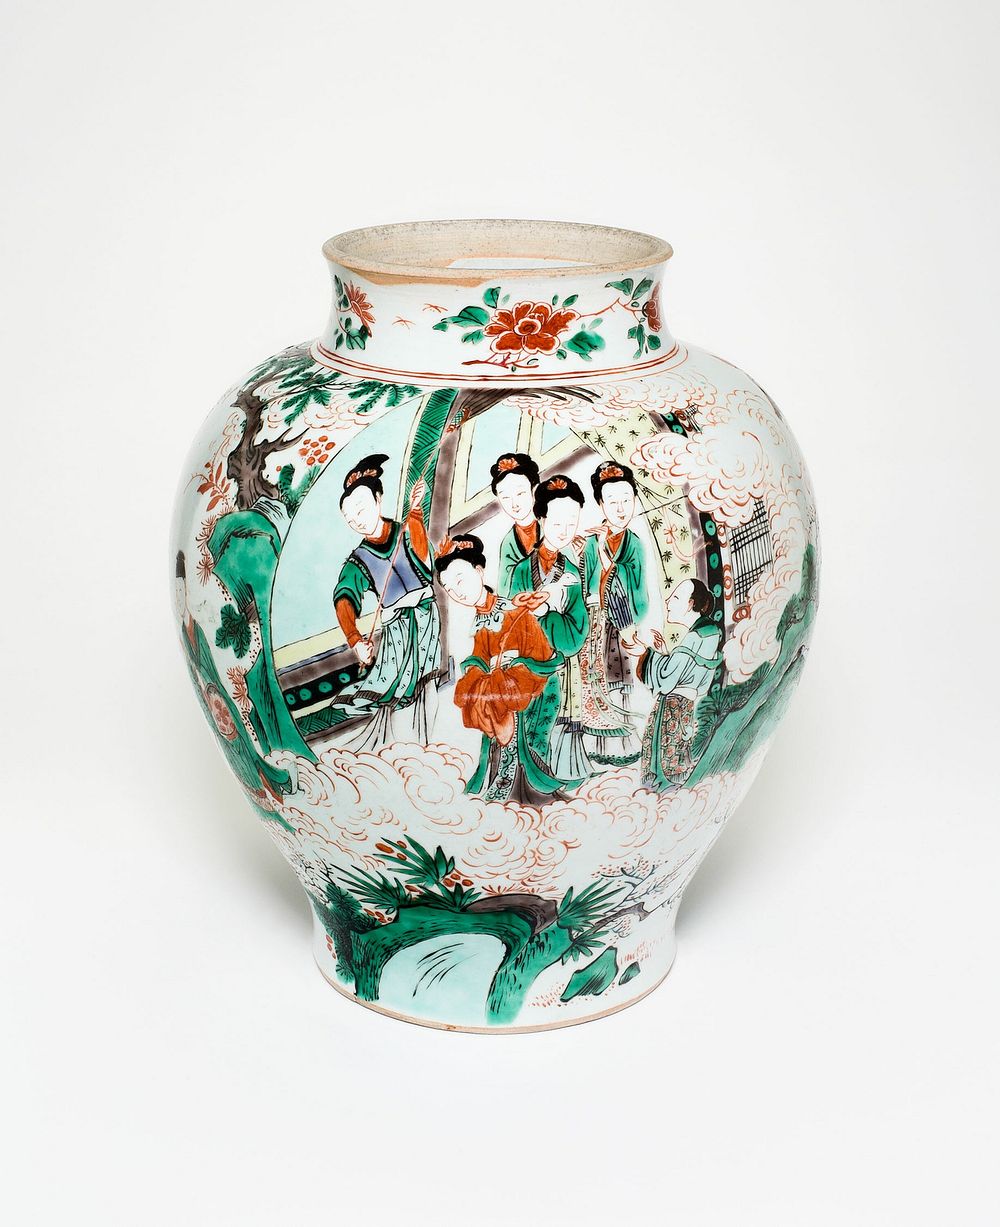 Jar with Figural Scenes and Poem Describing the Osmanthus and Moon